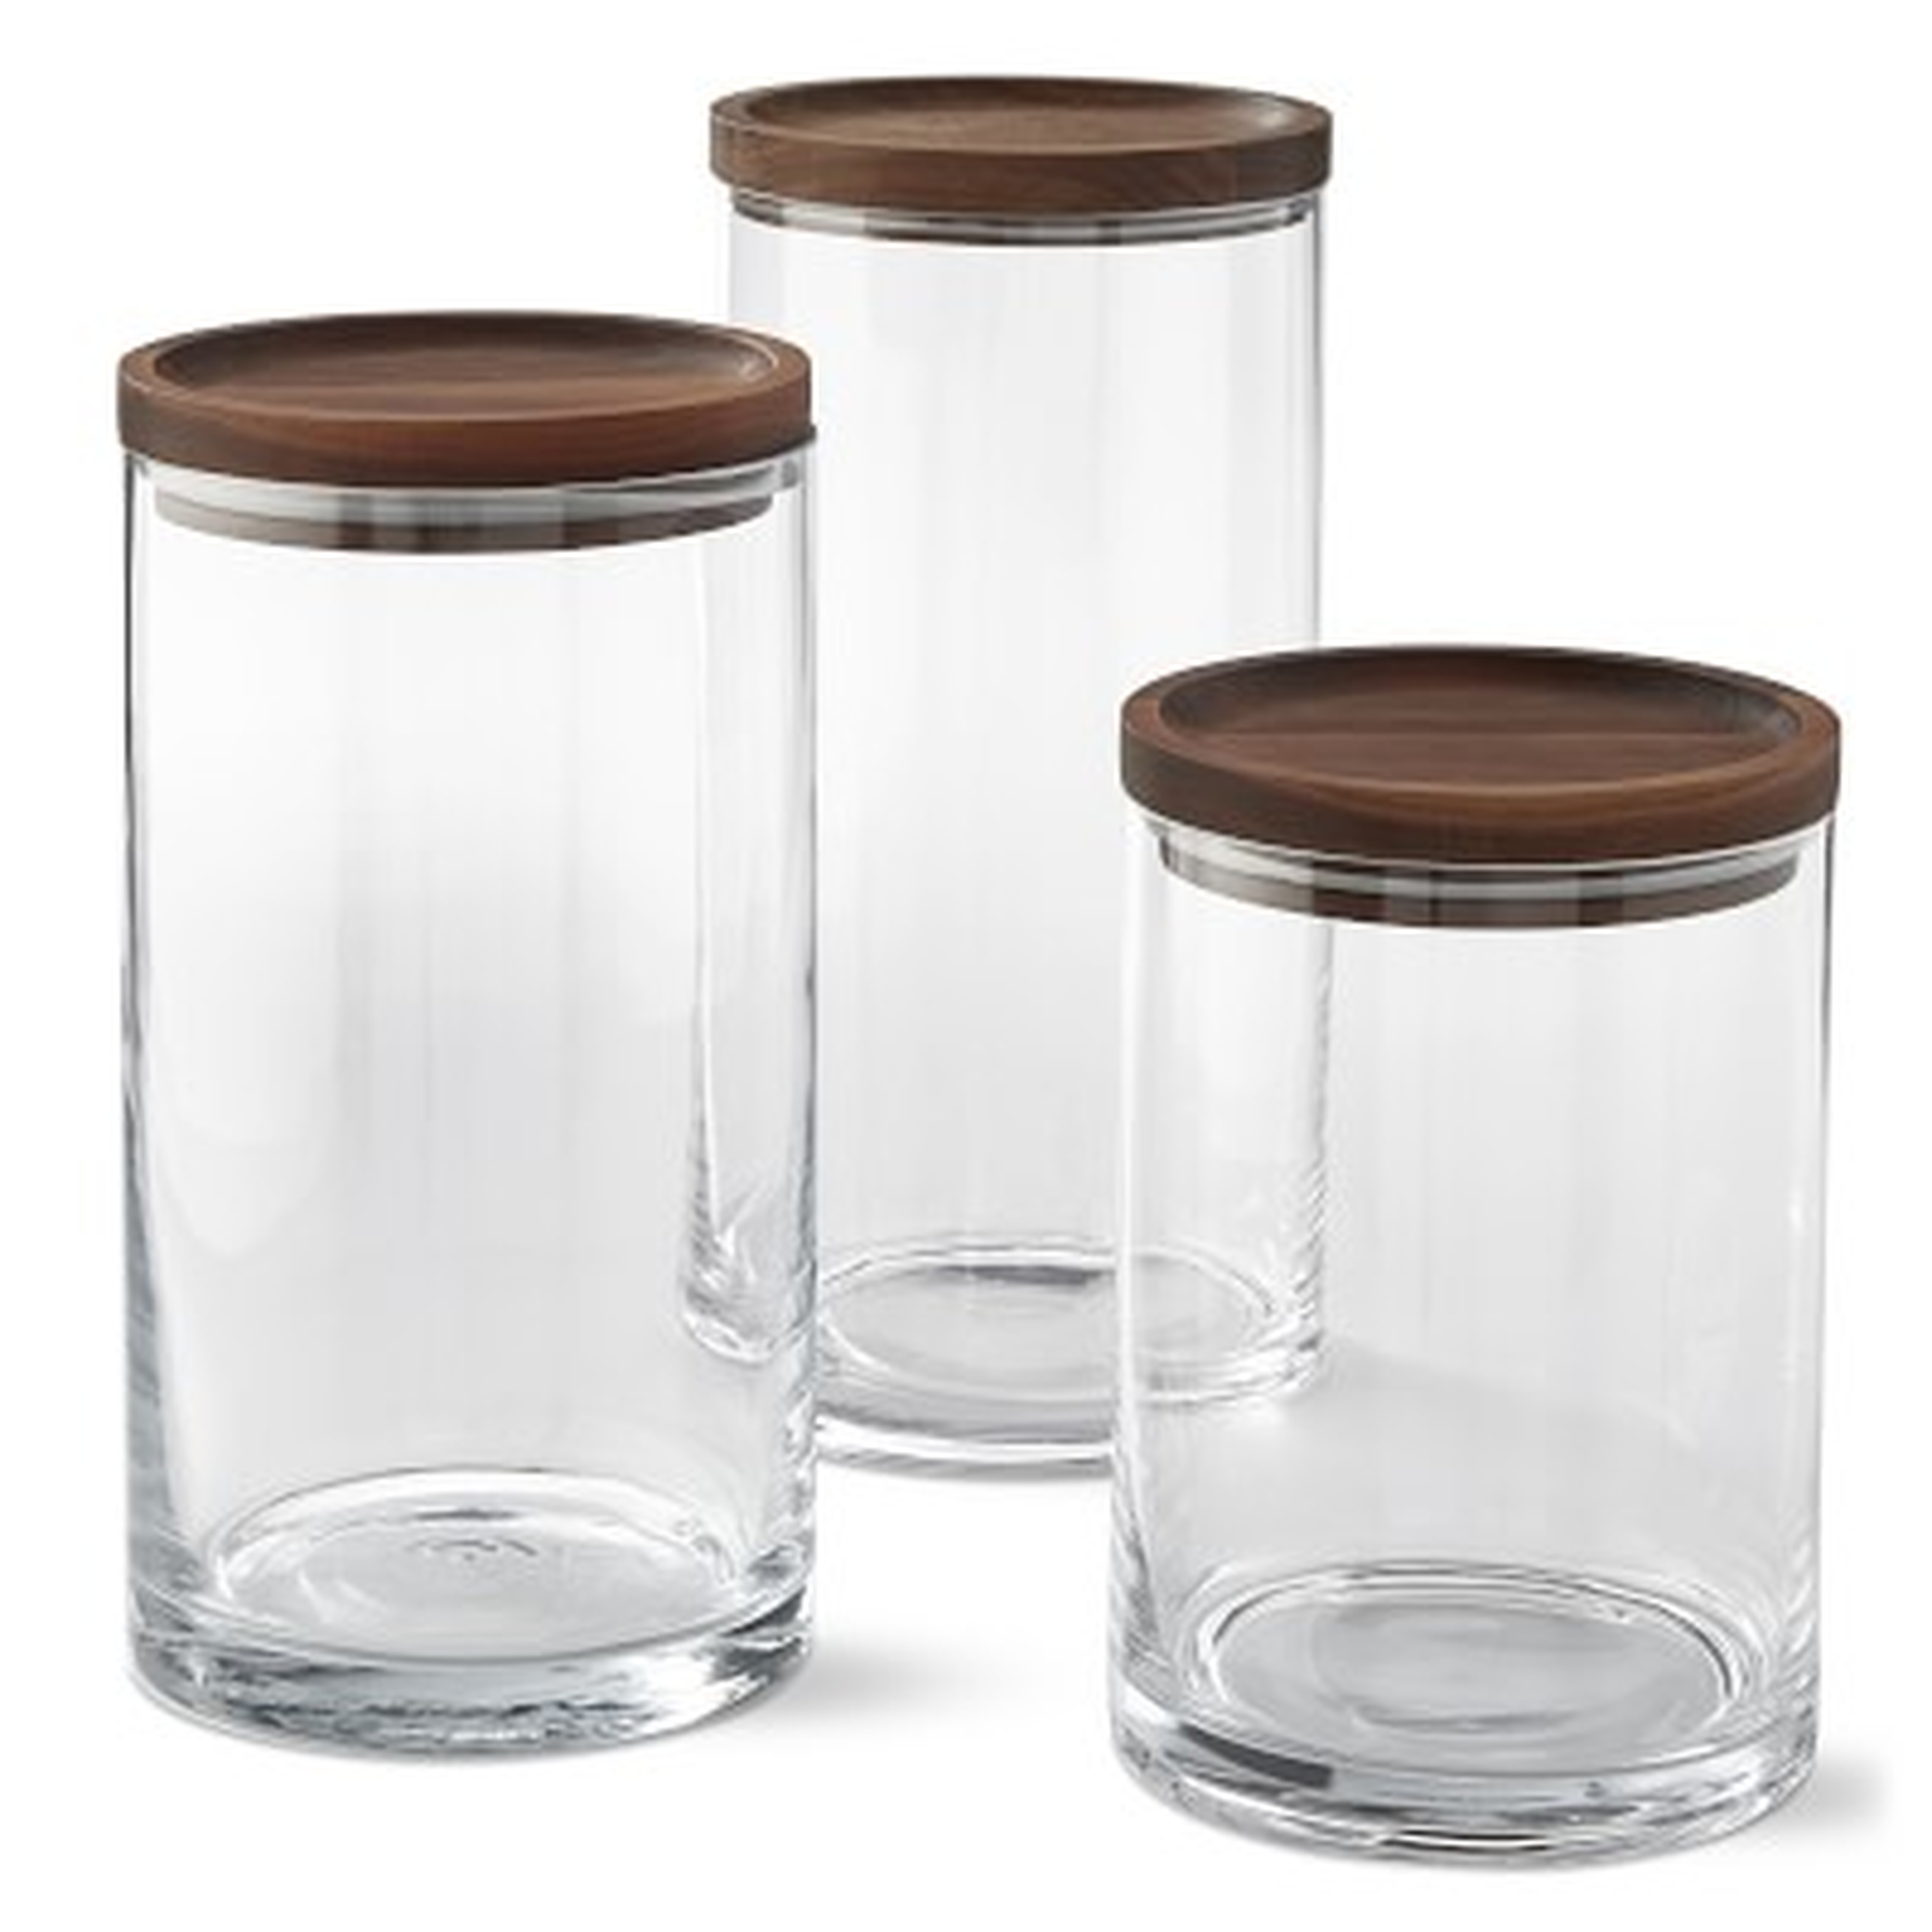 Walnut Canisters, Set of 3 - Williams Sonoma